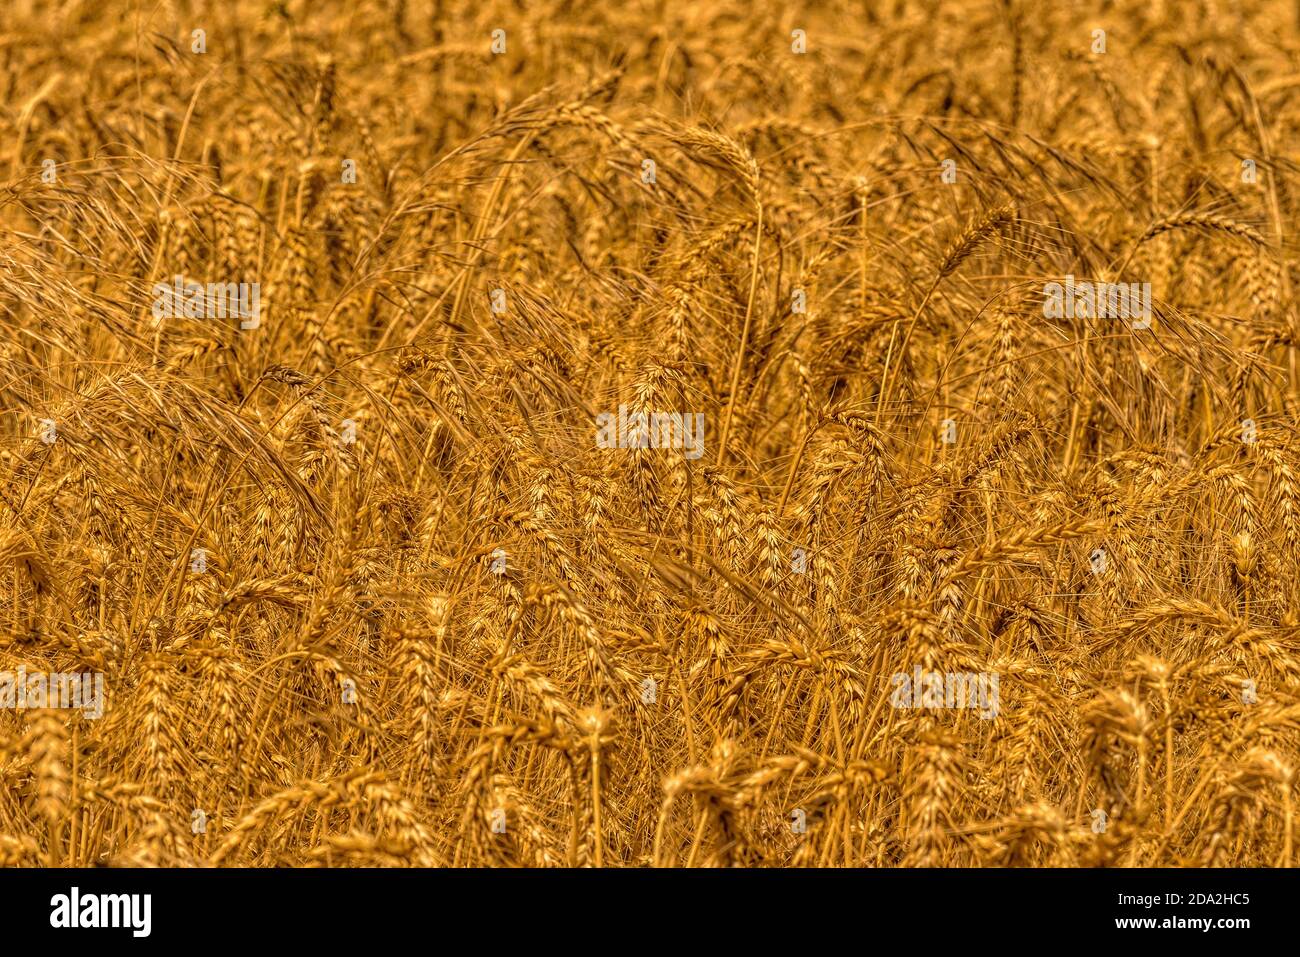 Wheatfields blowin' in the breeze. Ready for harvesting. Stock Photo